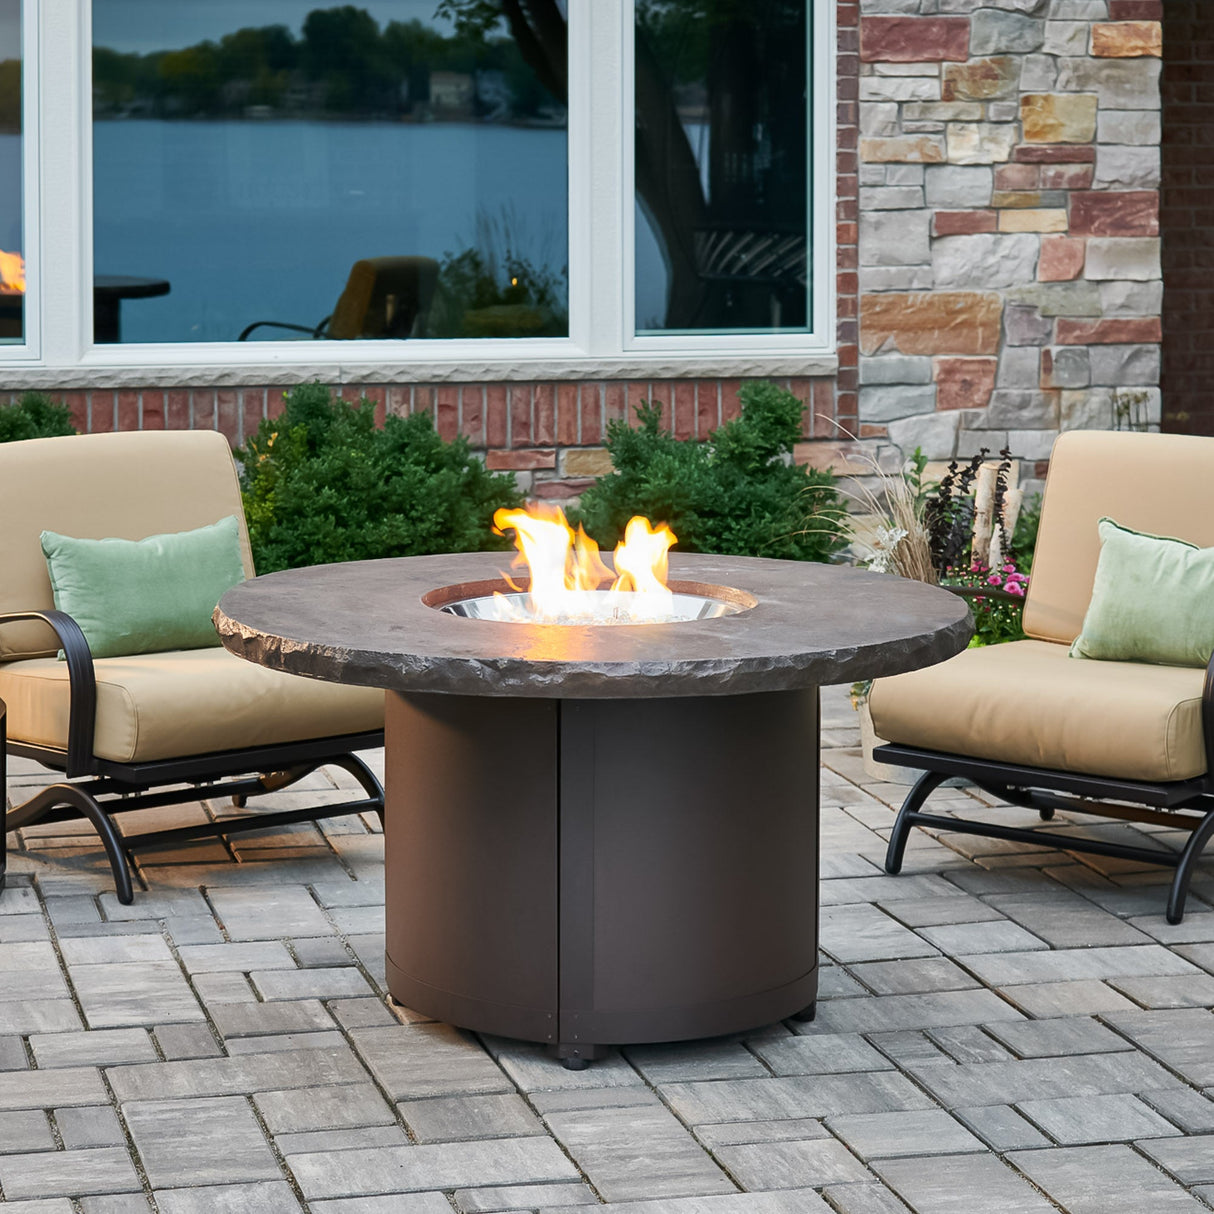 The Marbleized Noche Beacon Round Gas Fire Pit Table outside next to outdoor furniture